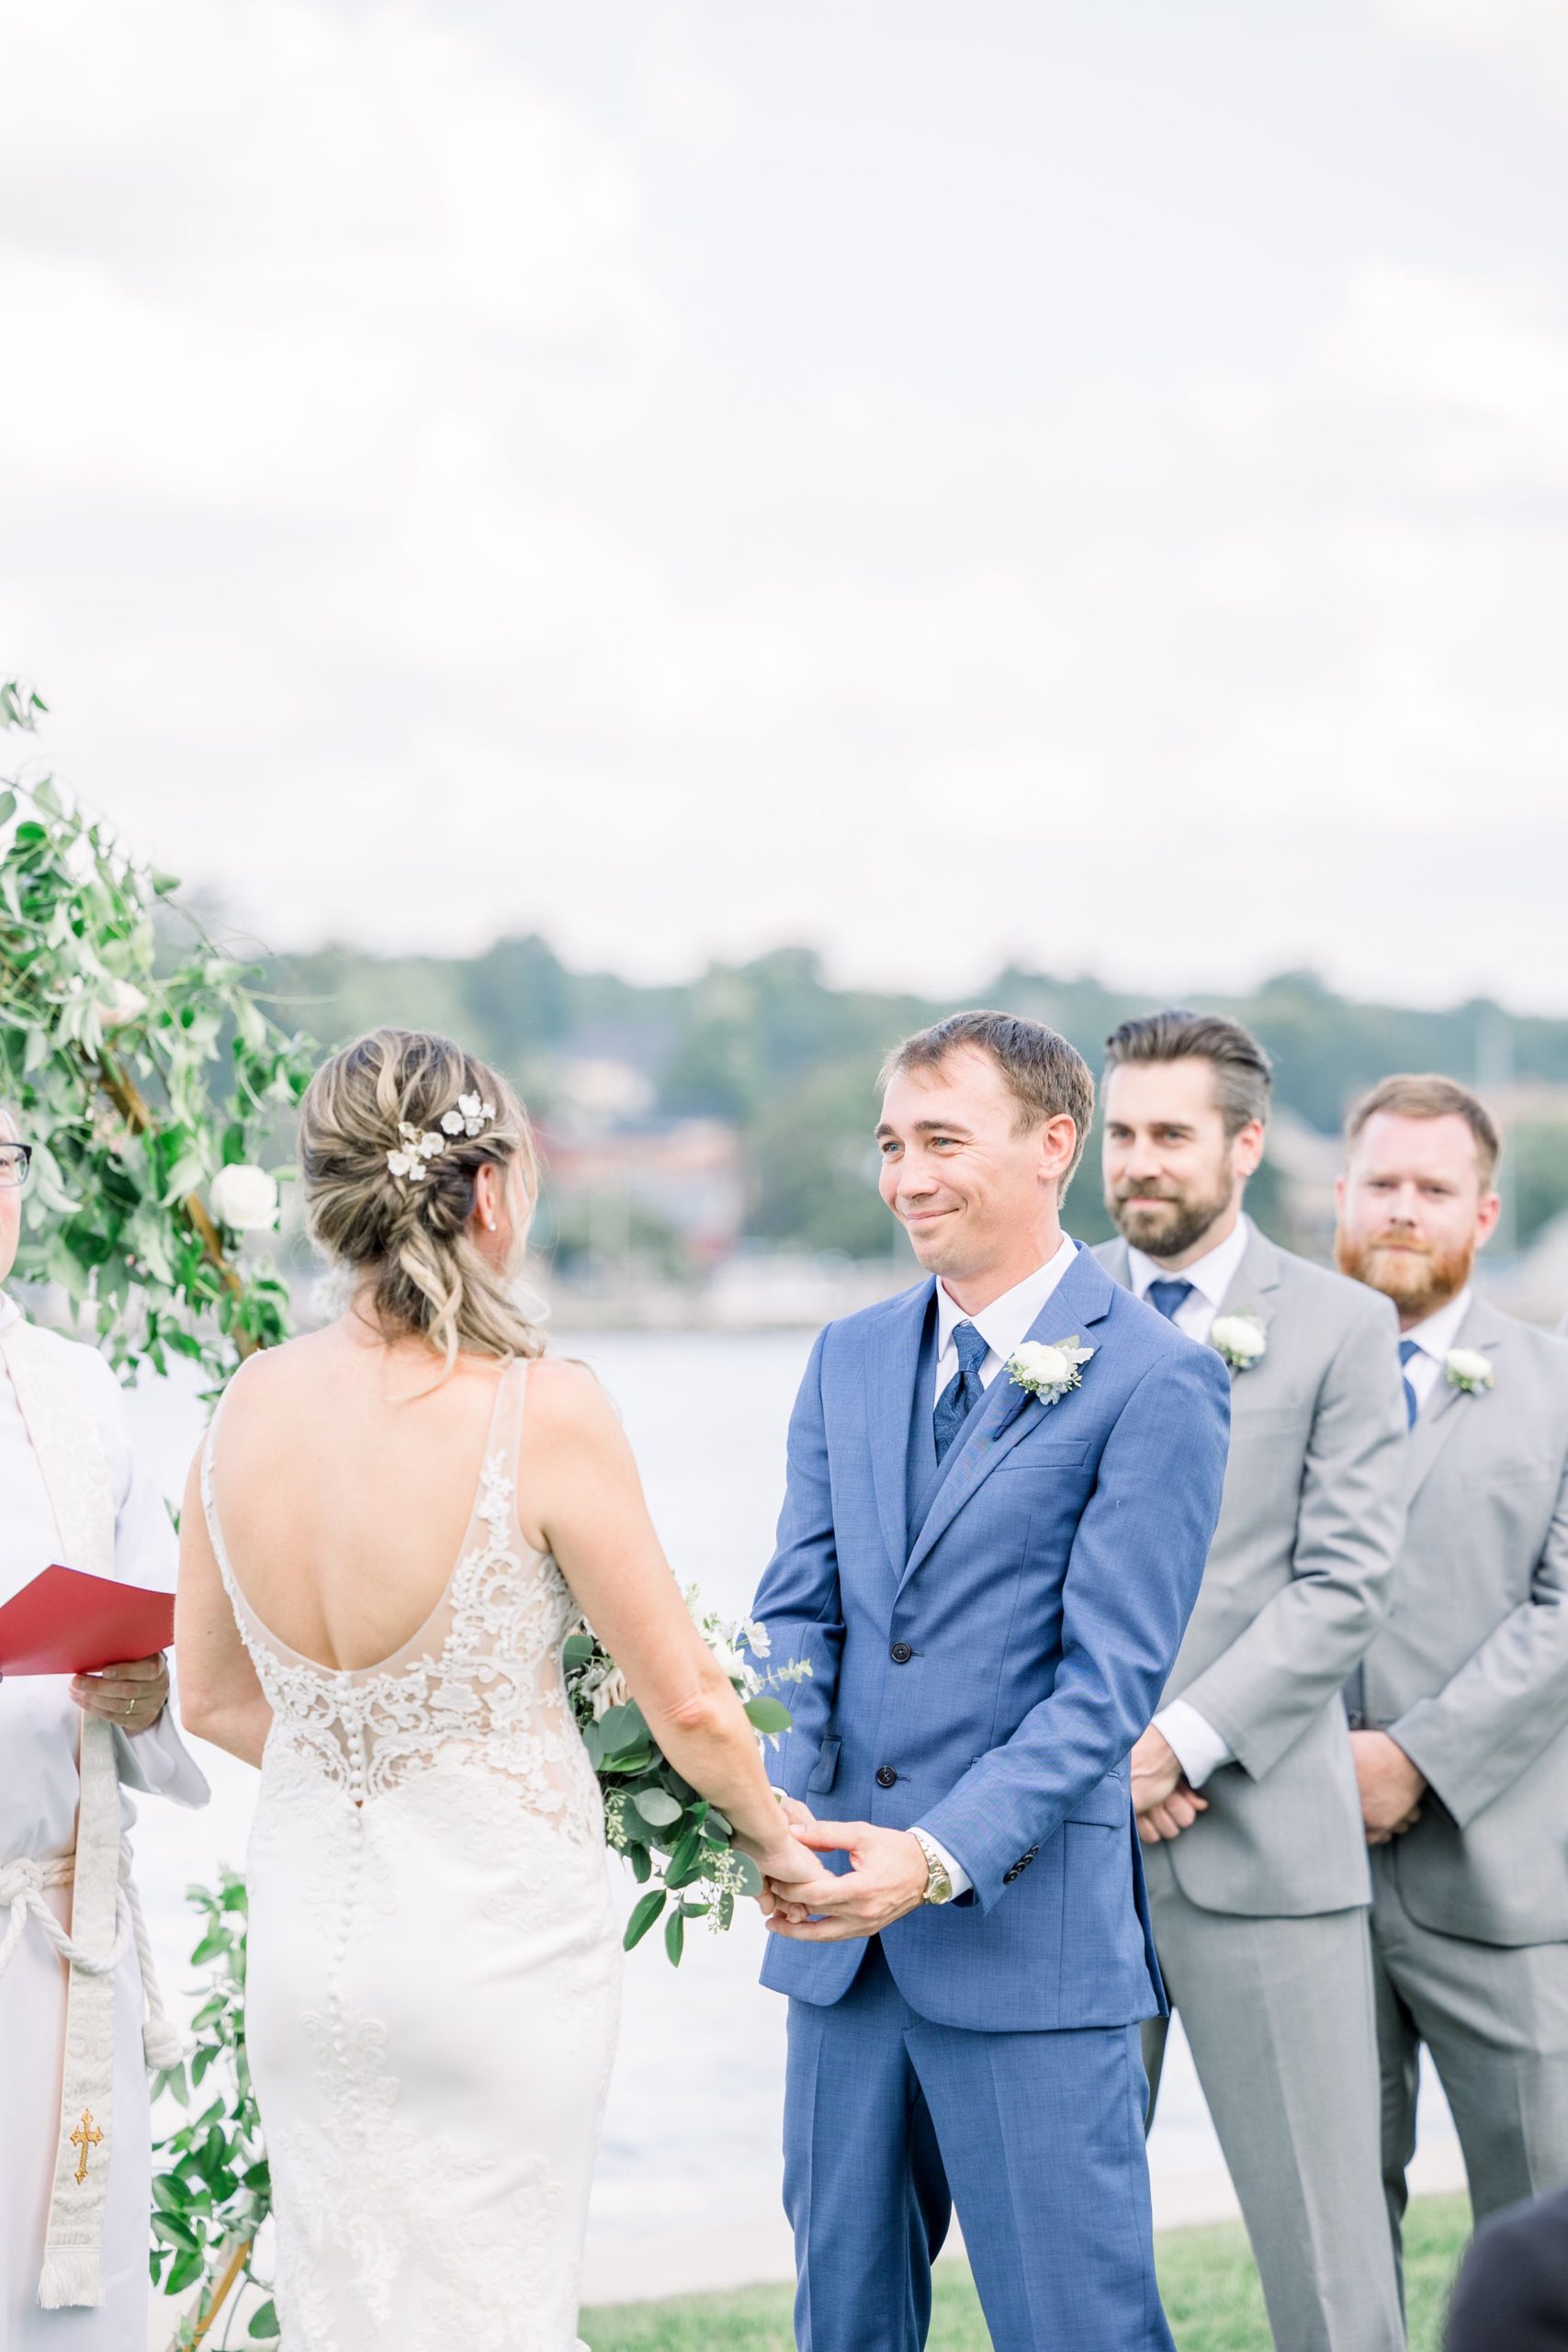 Groom smiles at bride during wedding ceremony at The Boathouse on Lake Charlevoix.